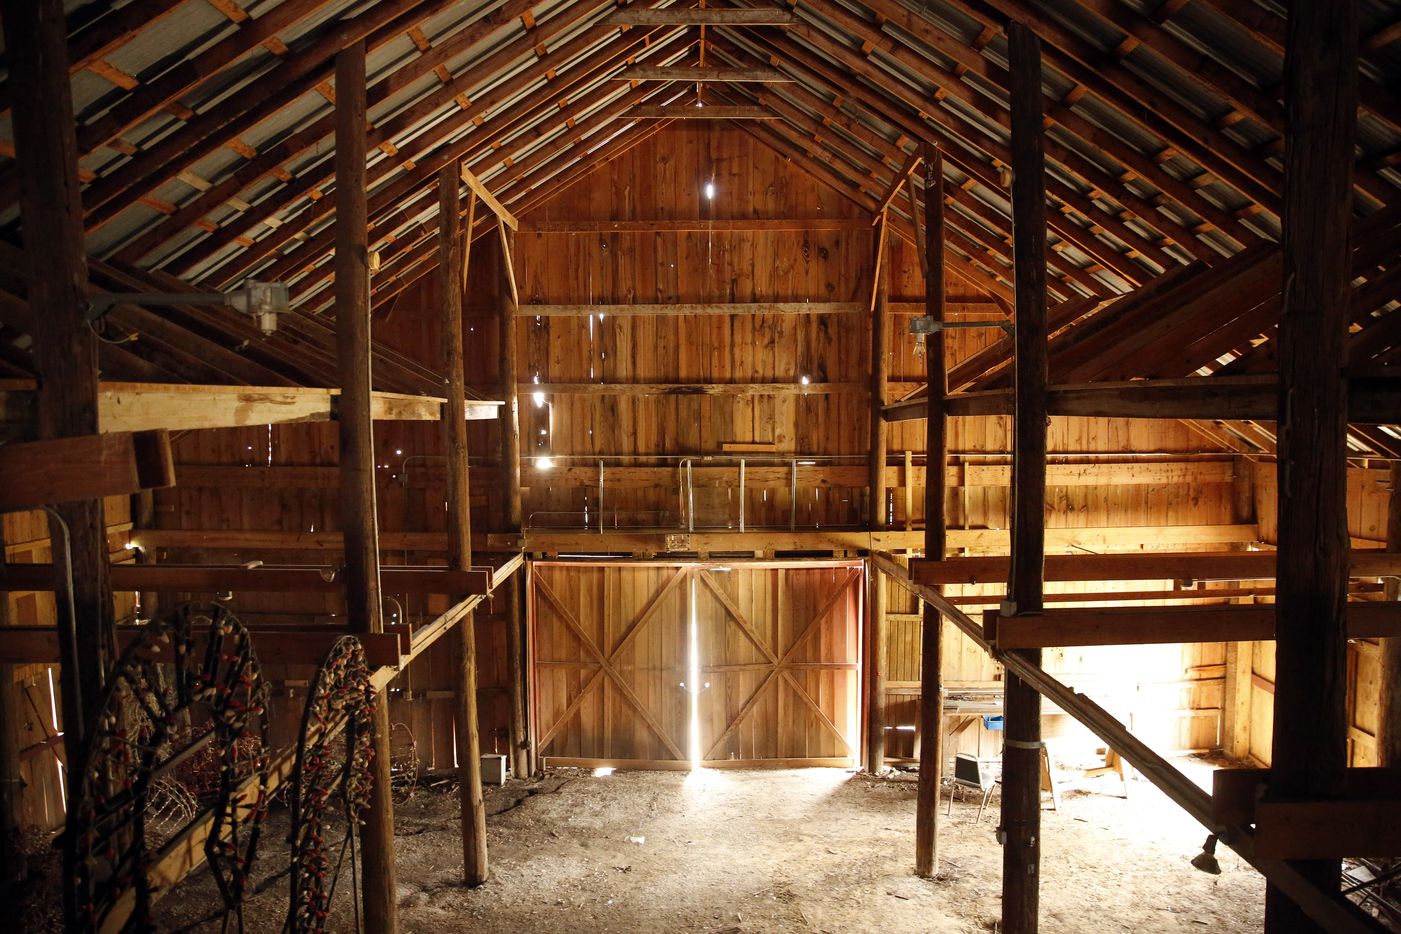 An interior view of the big red barn that is the centerpiece of Dallas Parks and Recreation's Samuell Farm.